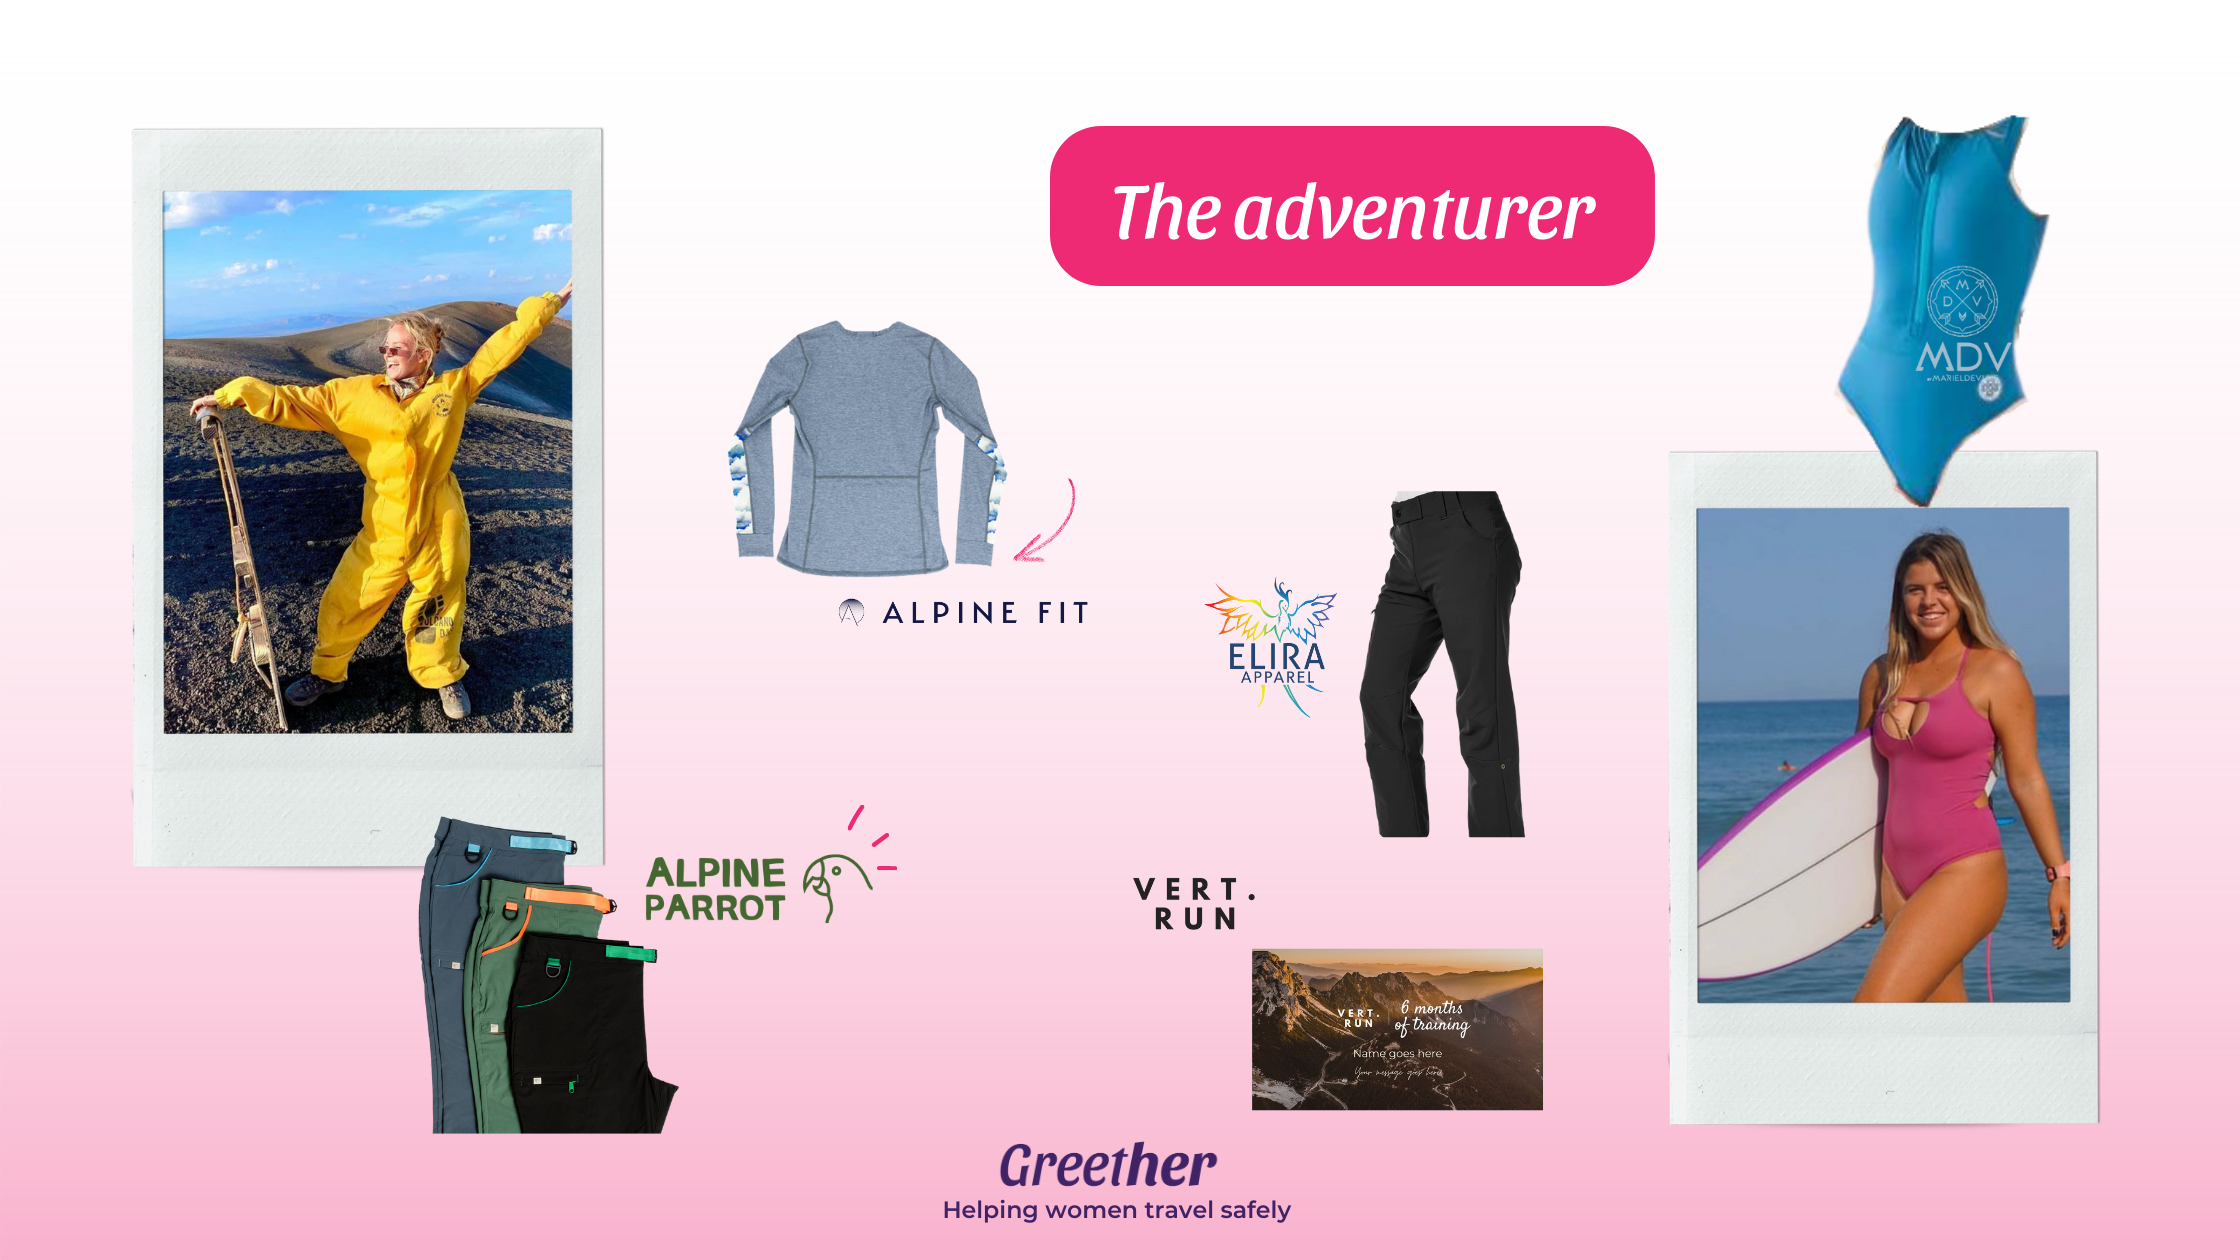 The adventurer traveler gift guide by Greether